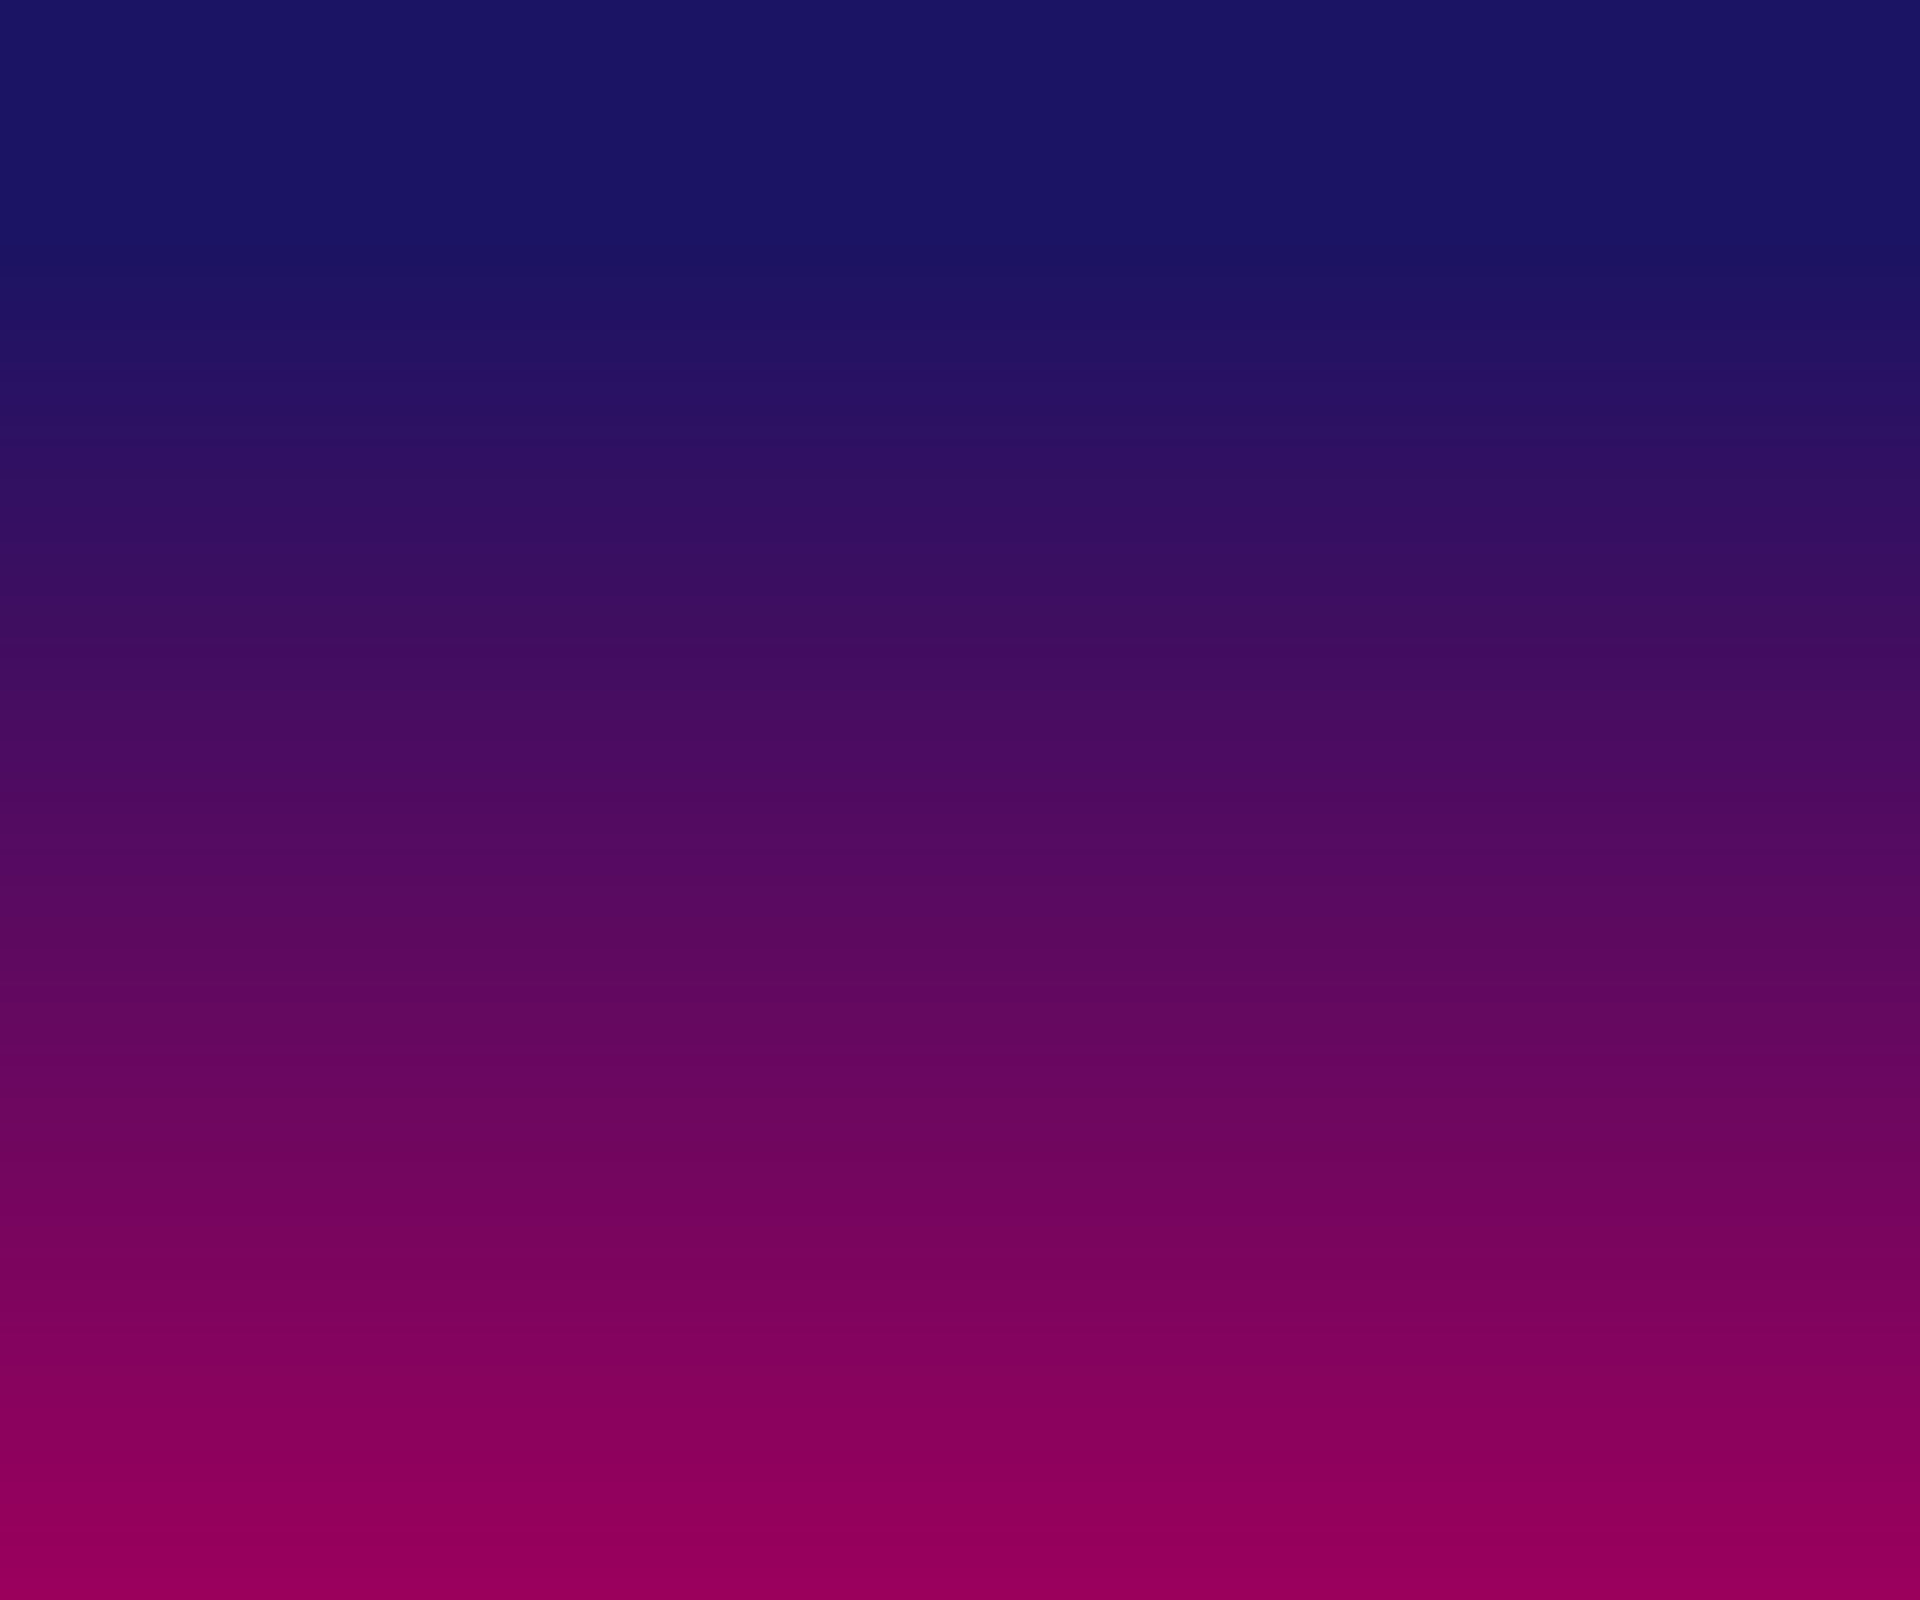 purple gradient background, great for banners, presentations, business ...